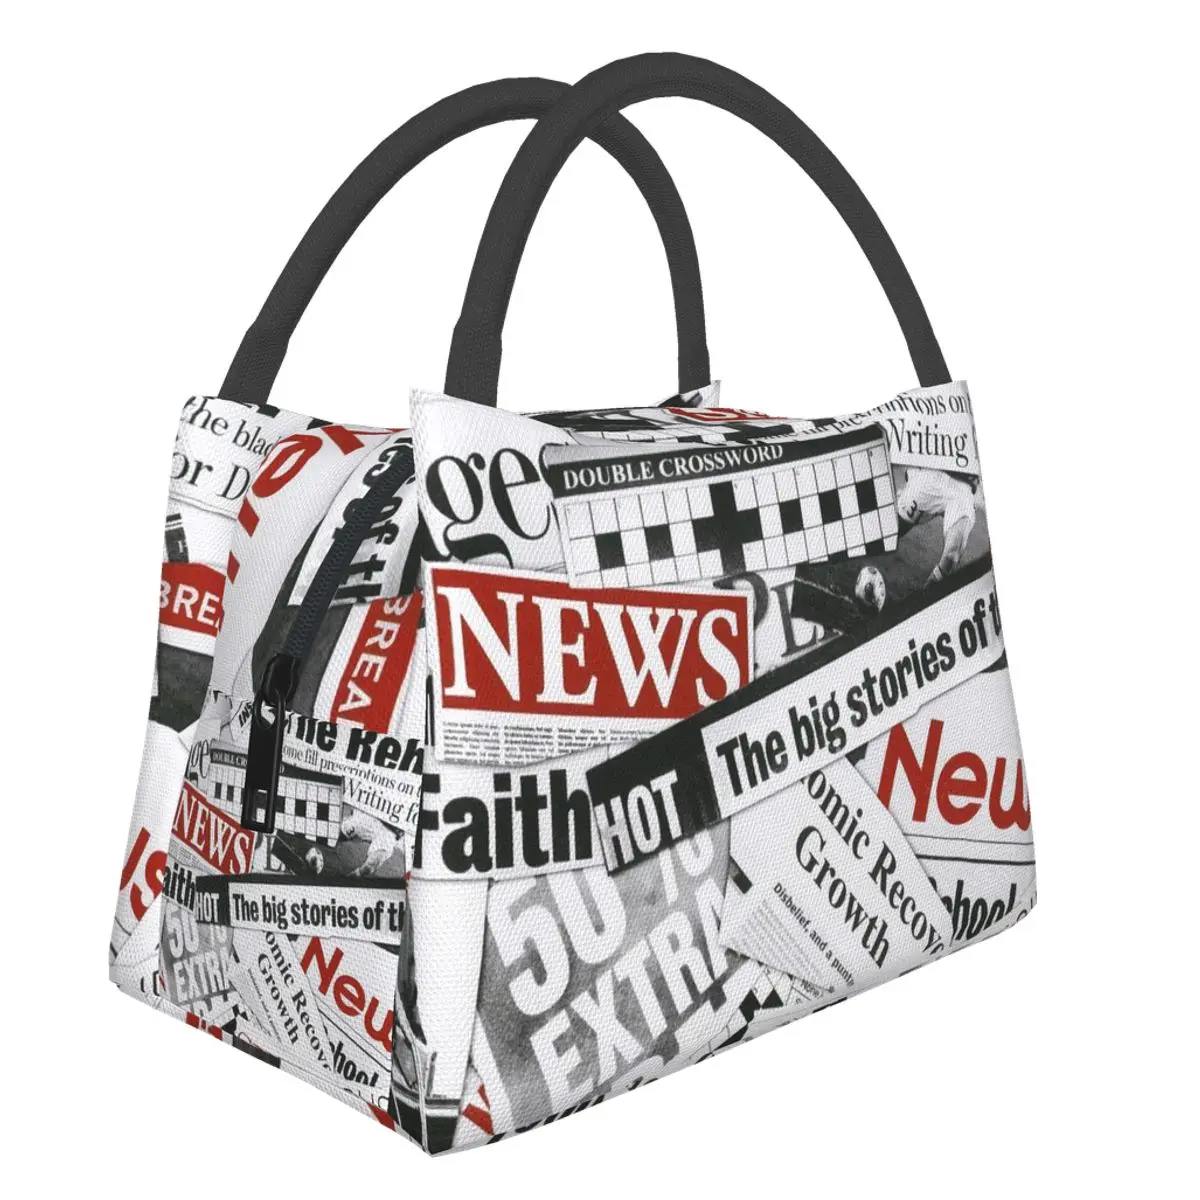 Portable Lunch Bag Newspaper Pattern Print Thermal Insulated Lunch Box Tote Cooler Handbag Bento Dinner Container School Storage portable lunch bag new thermal insulated box tote cooler handbag bento pouch dinner container outdoor picnic food storage case